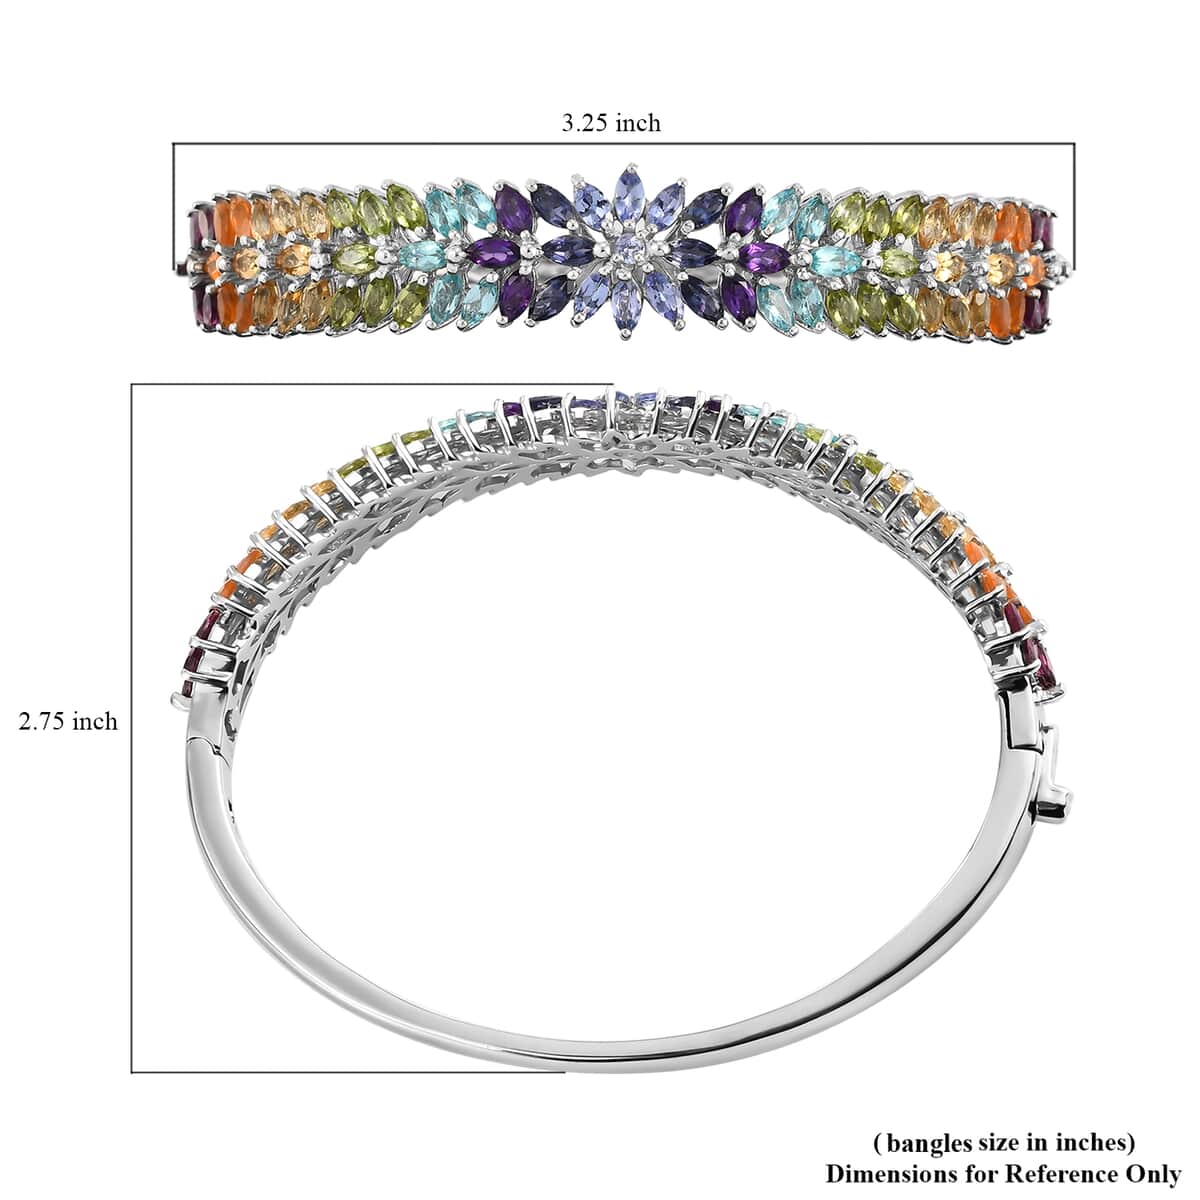 Floral Spray Multi-gemstone Bangle Bracelet For Women in Platinum Plated Sterling Silver with Push Clasp 7.5 Inches image number 4